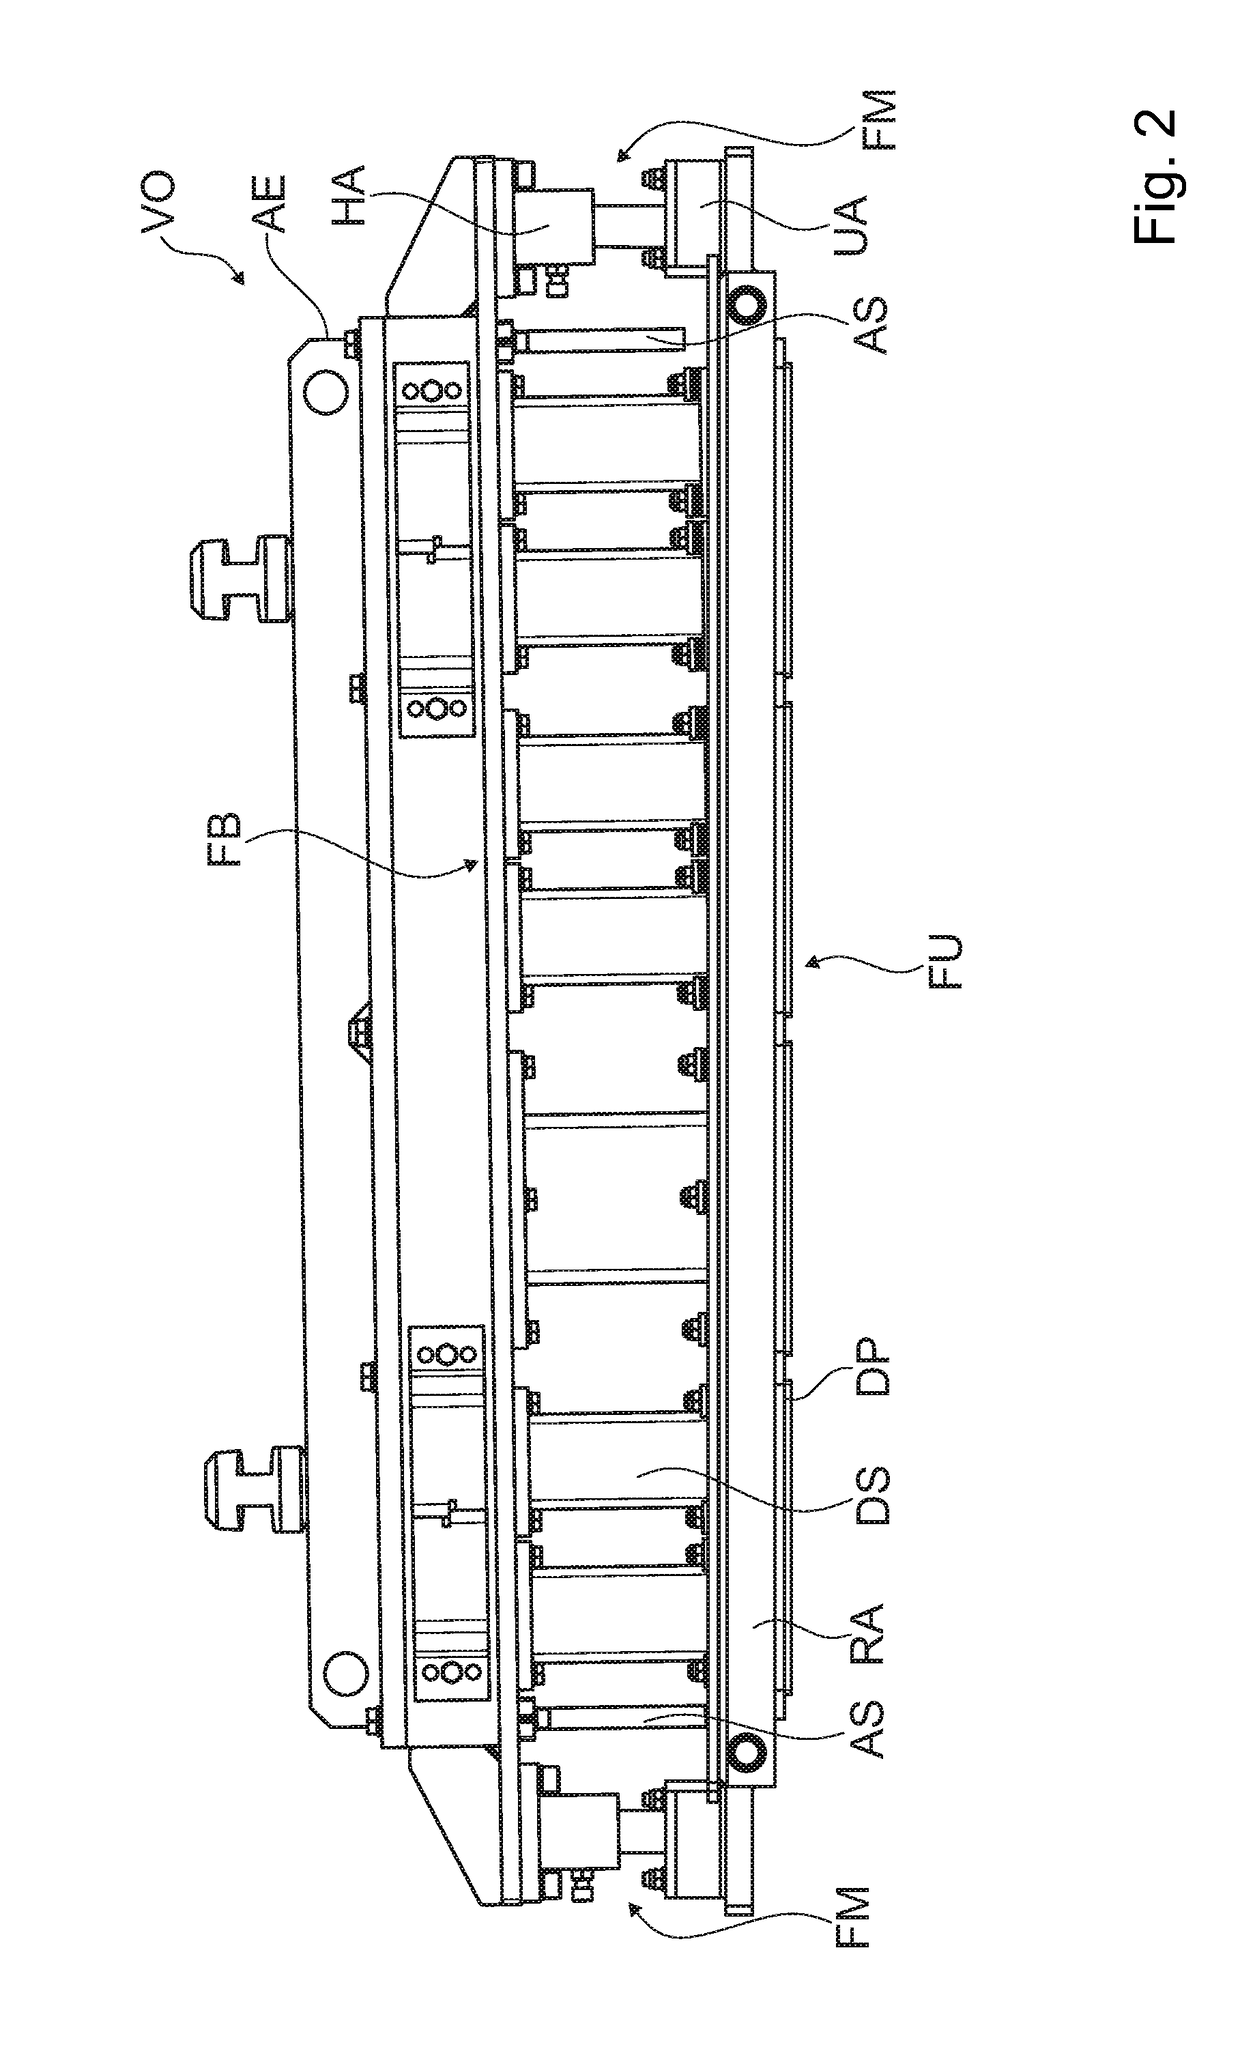 Apparatus for the production of molded concrete parts in a molding machine